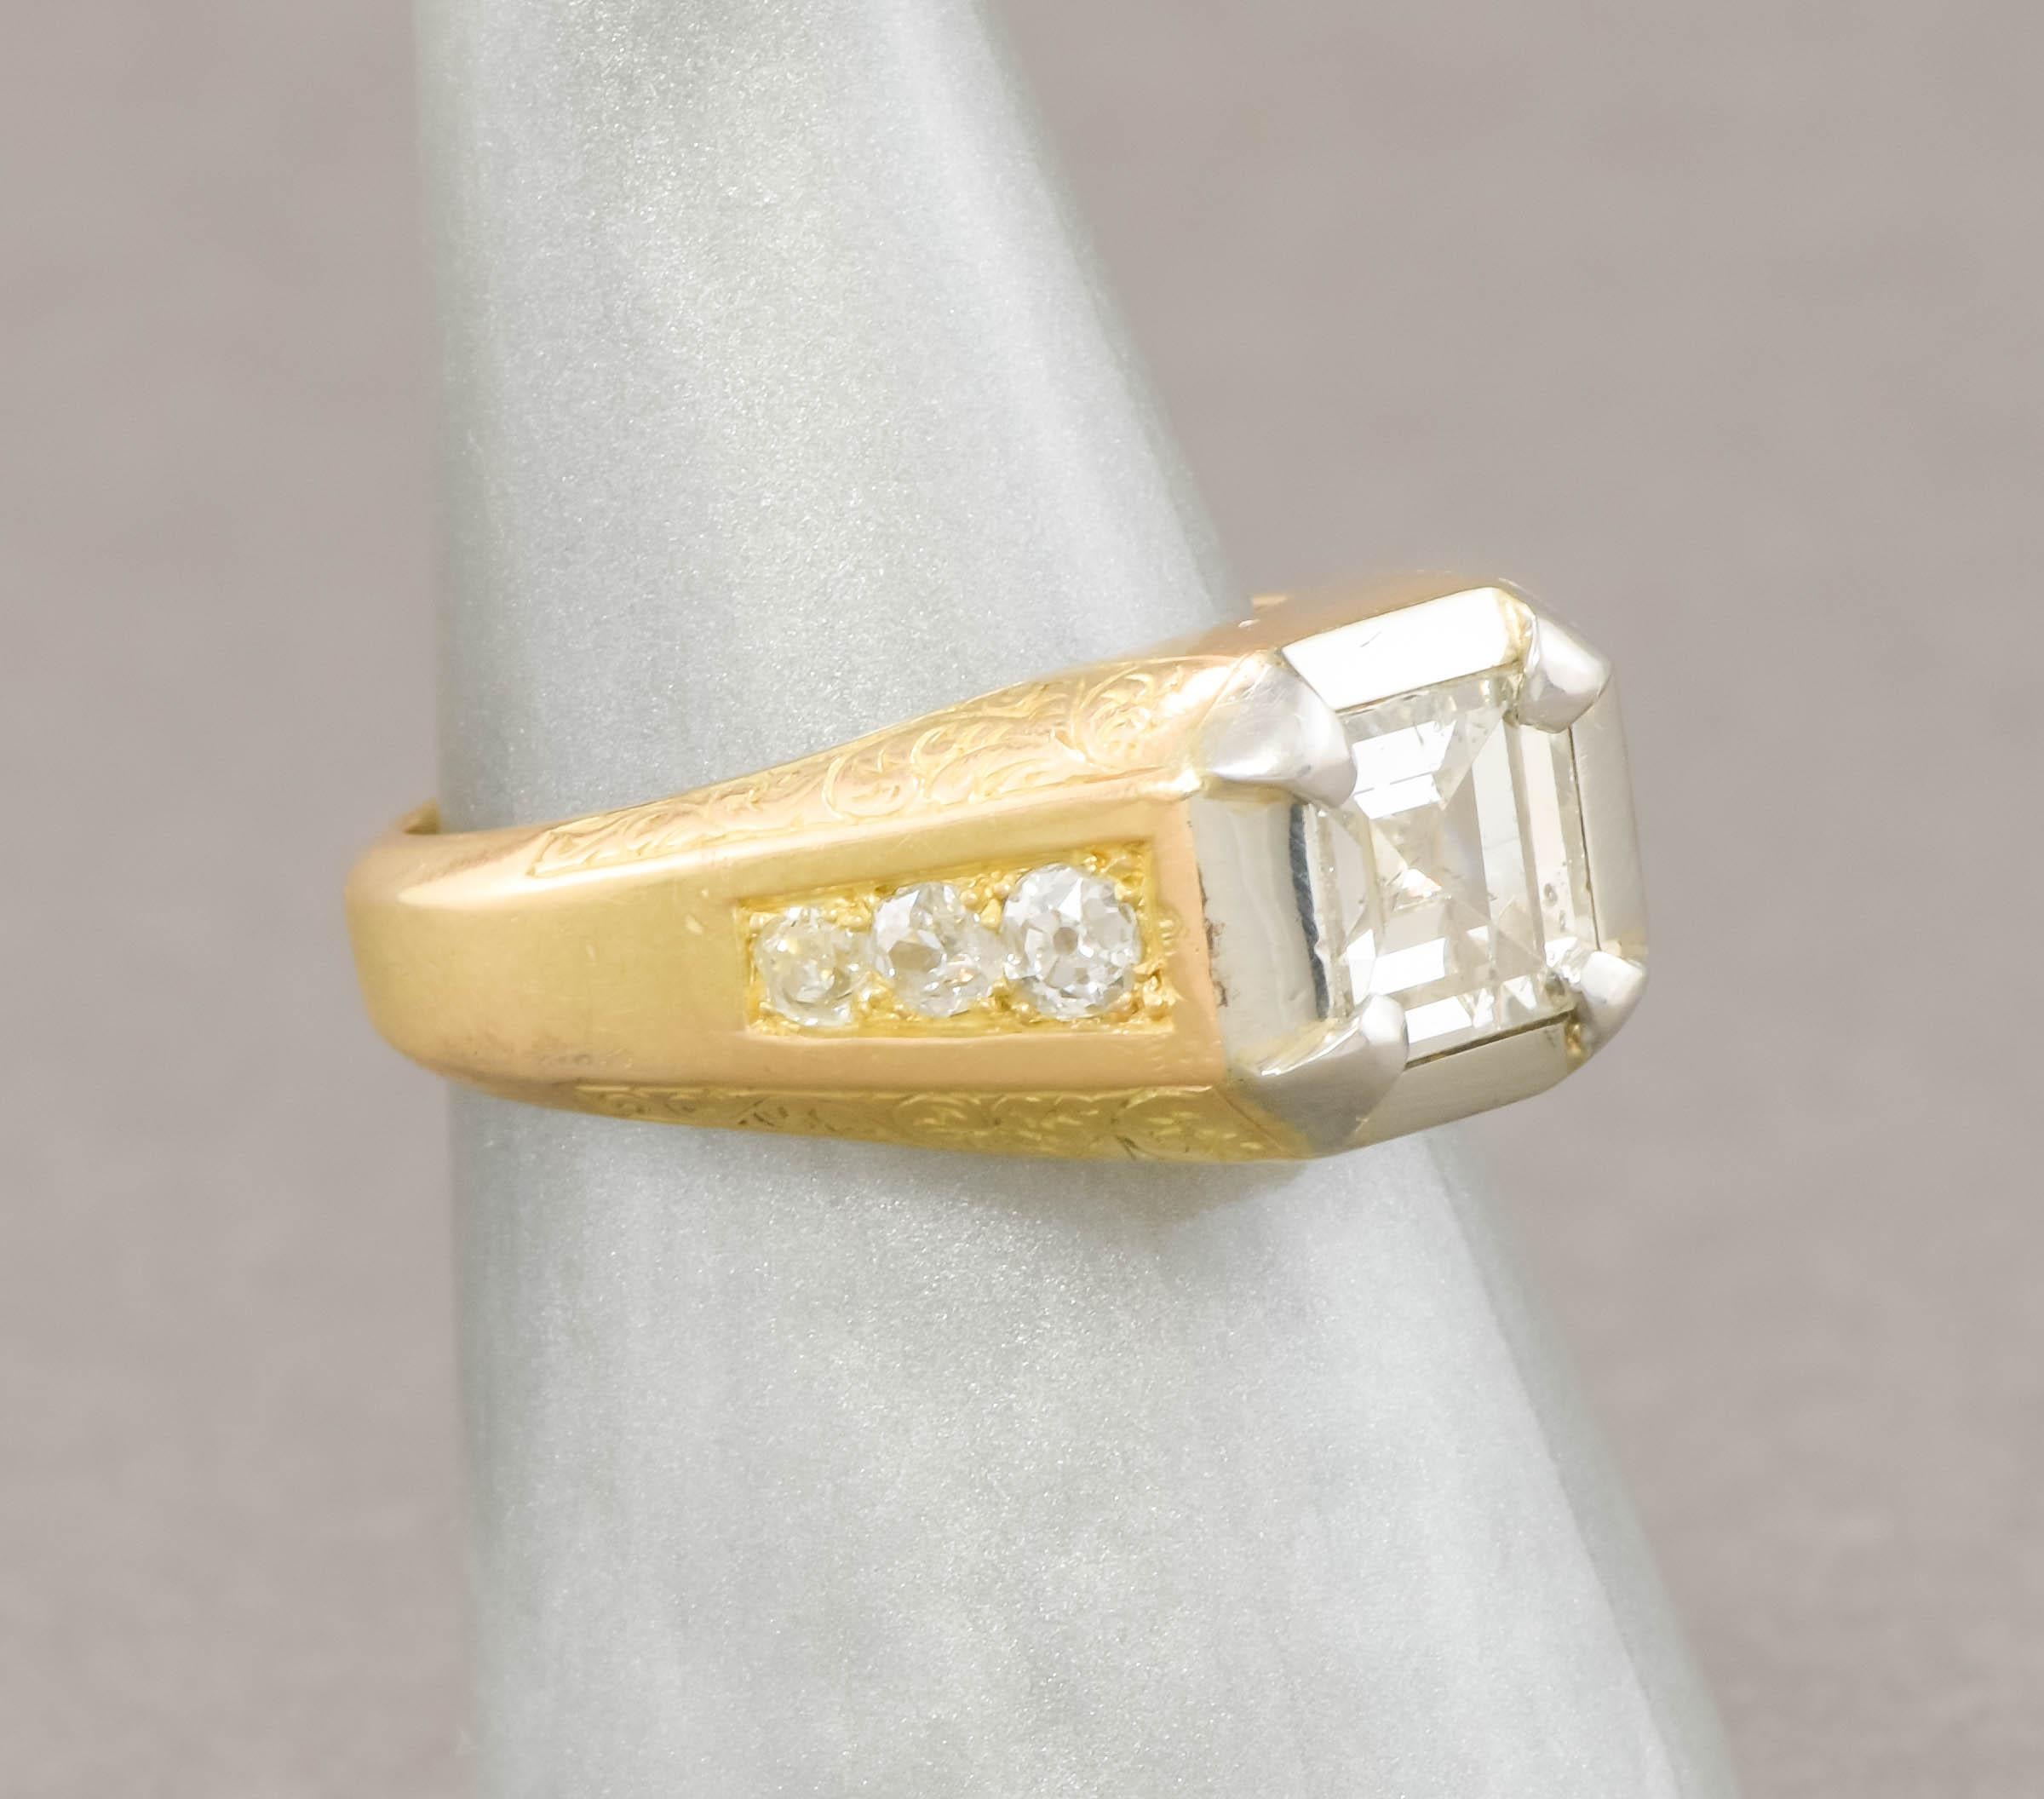 Heavy French 18K Gold Step Cut Diamond Ring with Hand Engraving, 1.73 ctw In Good Condition For Sale In Danvers, MA